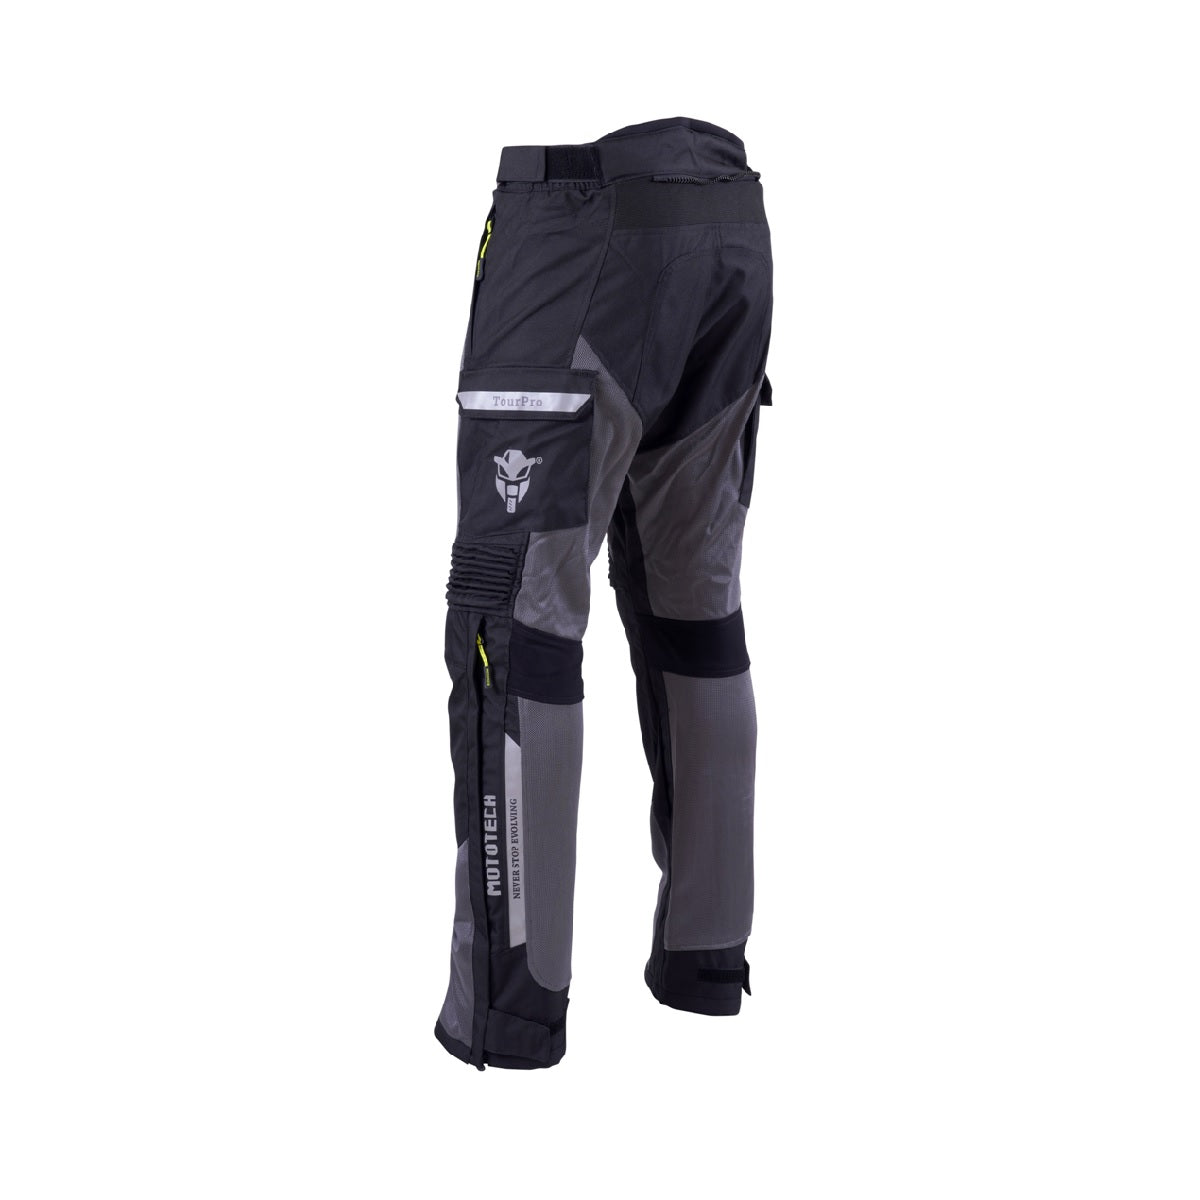 Men's Quest Riding Trousers | Harley-Davidson USA